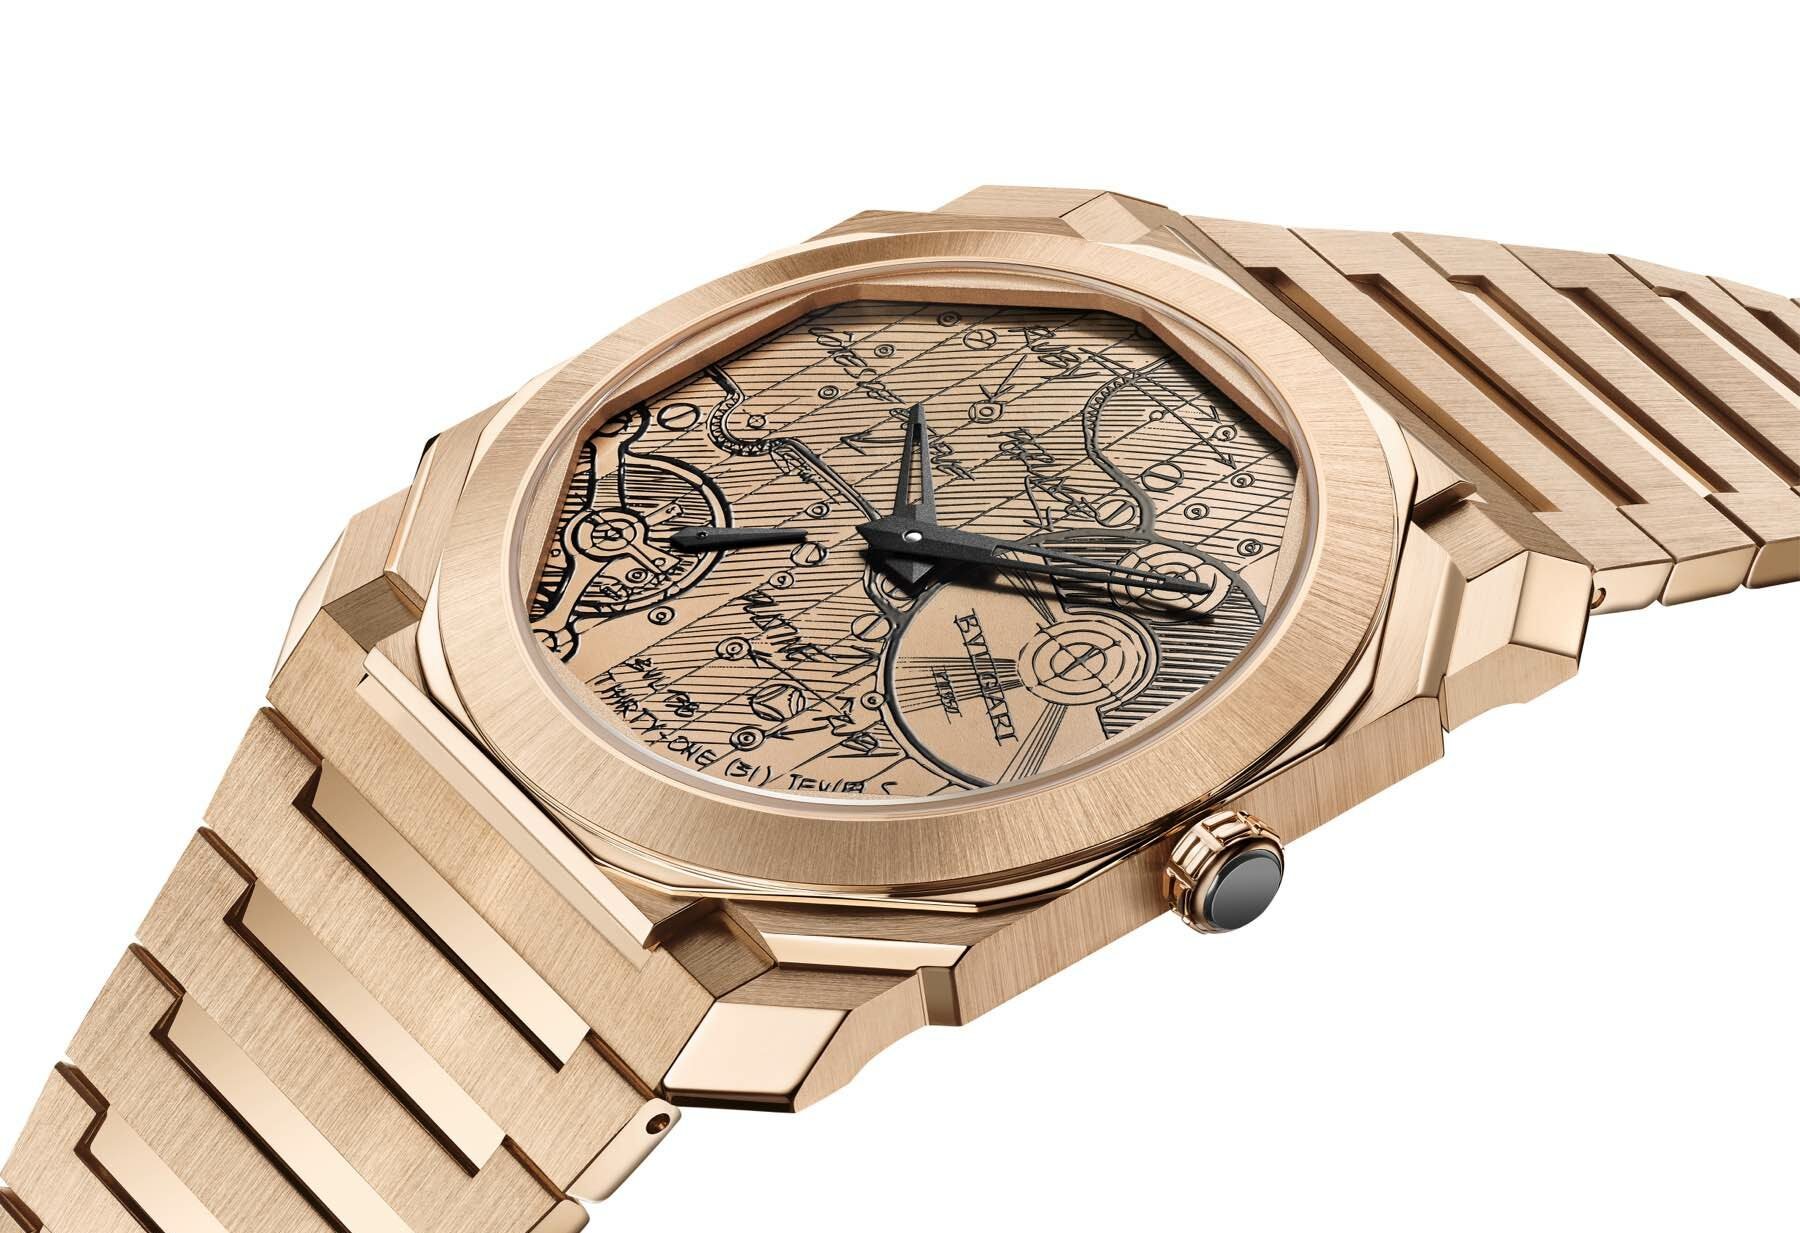 Introducing: The Next Bvlgari Octo Finissimo Sketch ? An Artistic Alternative To Skeletonization